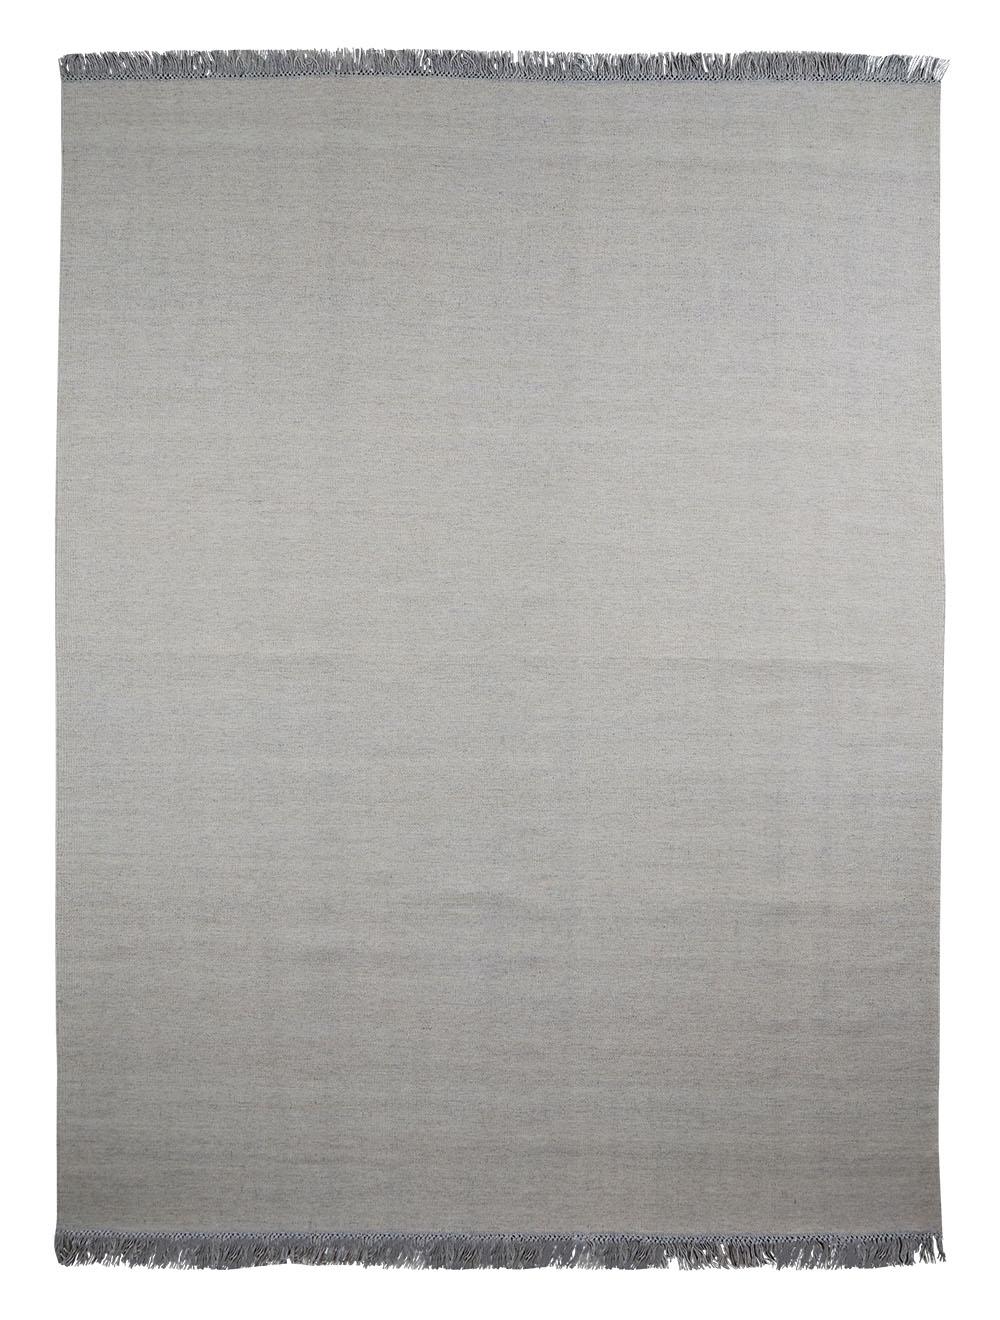 Chalk with Fringes Escape Kelim Carpet by Massimo Copenhagen
Designed by Space Copenhagen
Handwoven
Materials: 100% undyed natural wool.
Dimensions: W 300 x H 400 cm
Available colors: Chalk, Chalk with Fringes, Light Beige, Light Beige with